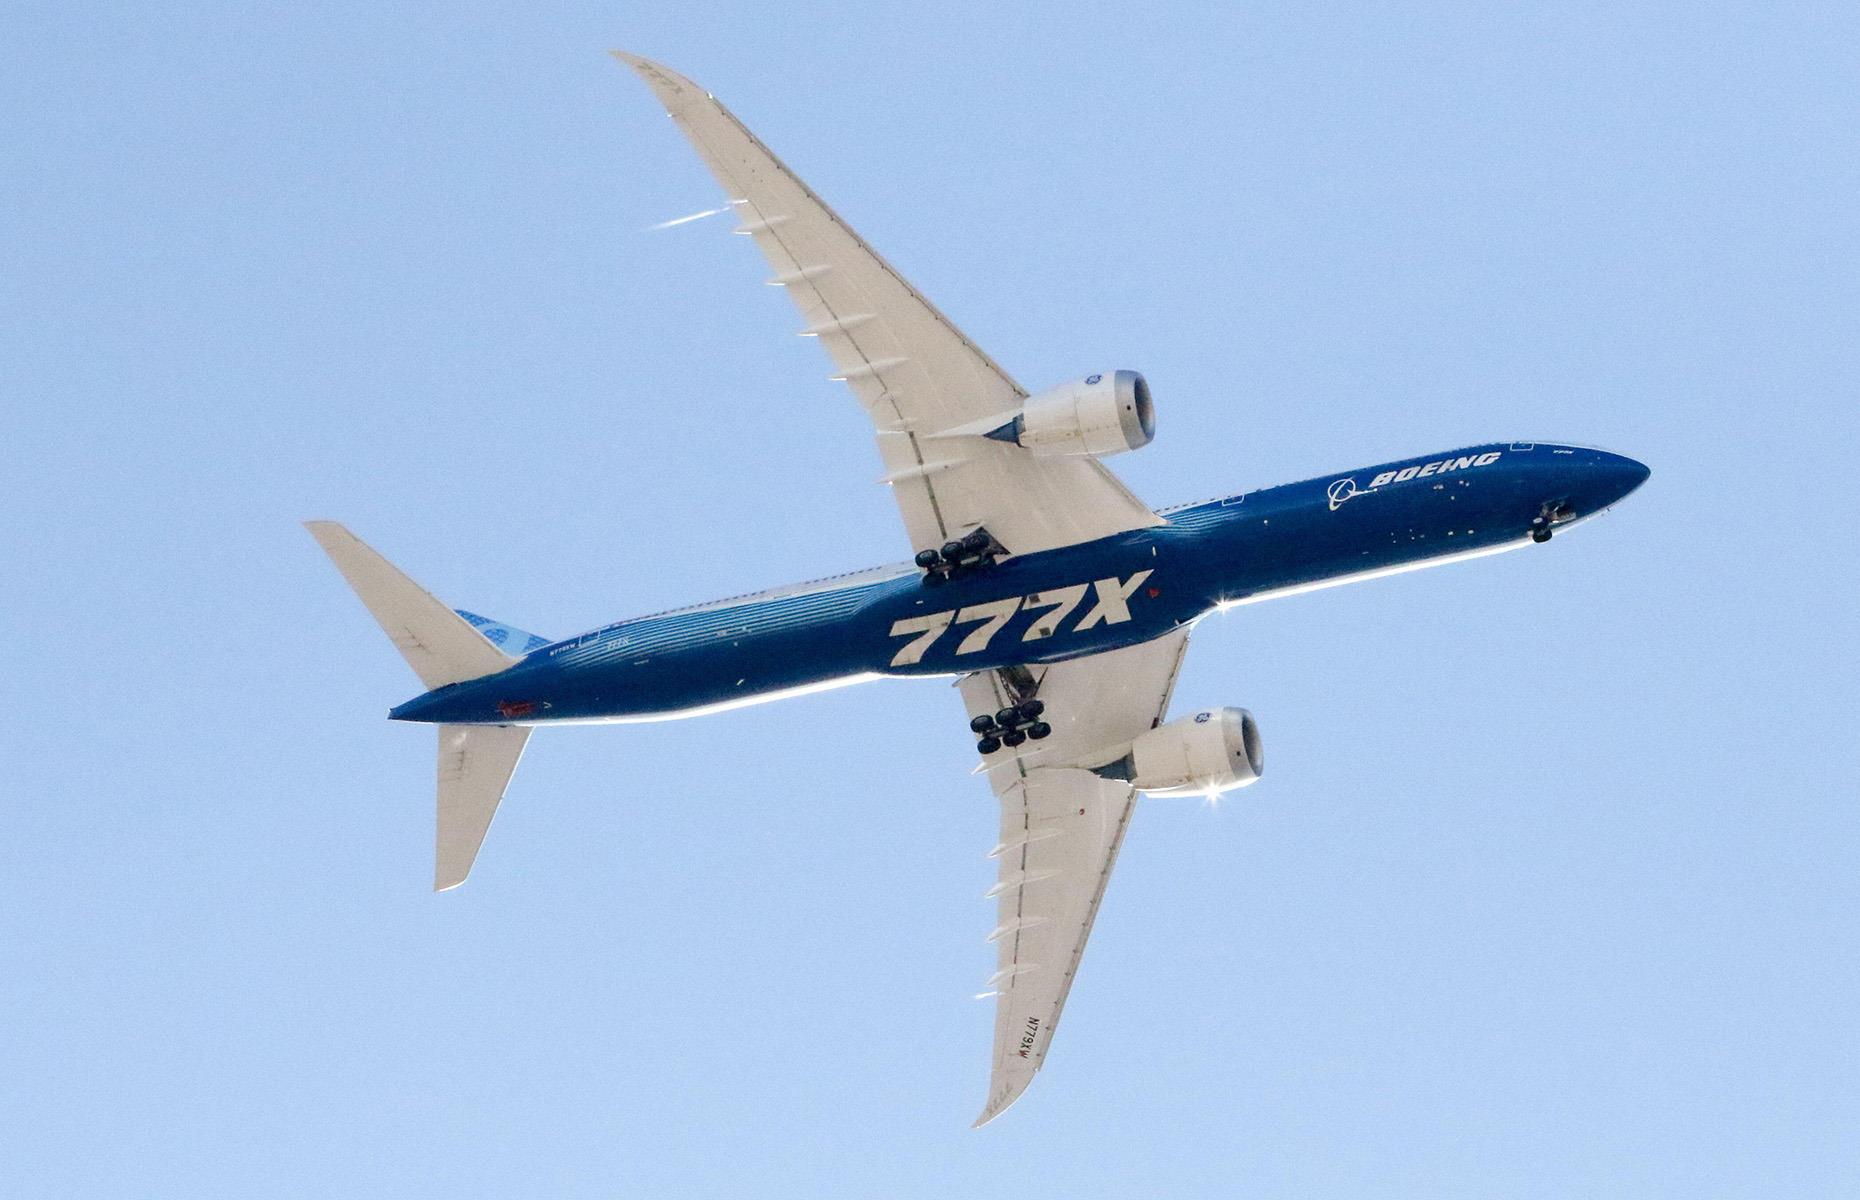 <p>When one door closes another door opens, and the decline of the 747 series makes way for the Boeing 777X to become the airline's new flagship jet. There will be two versions of the plane, the smaller 777-8 and the larger 777-9, which, at 251 feet (77m), will claim the title of 'world's longest active passenger plane' from the 747-8 by just a single foot when it officially enters service in 2025.</p>